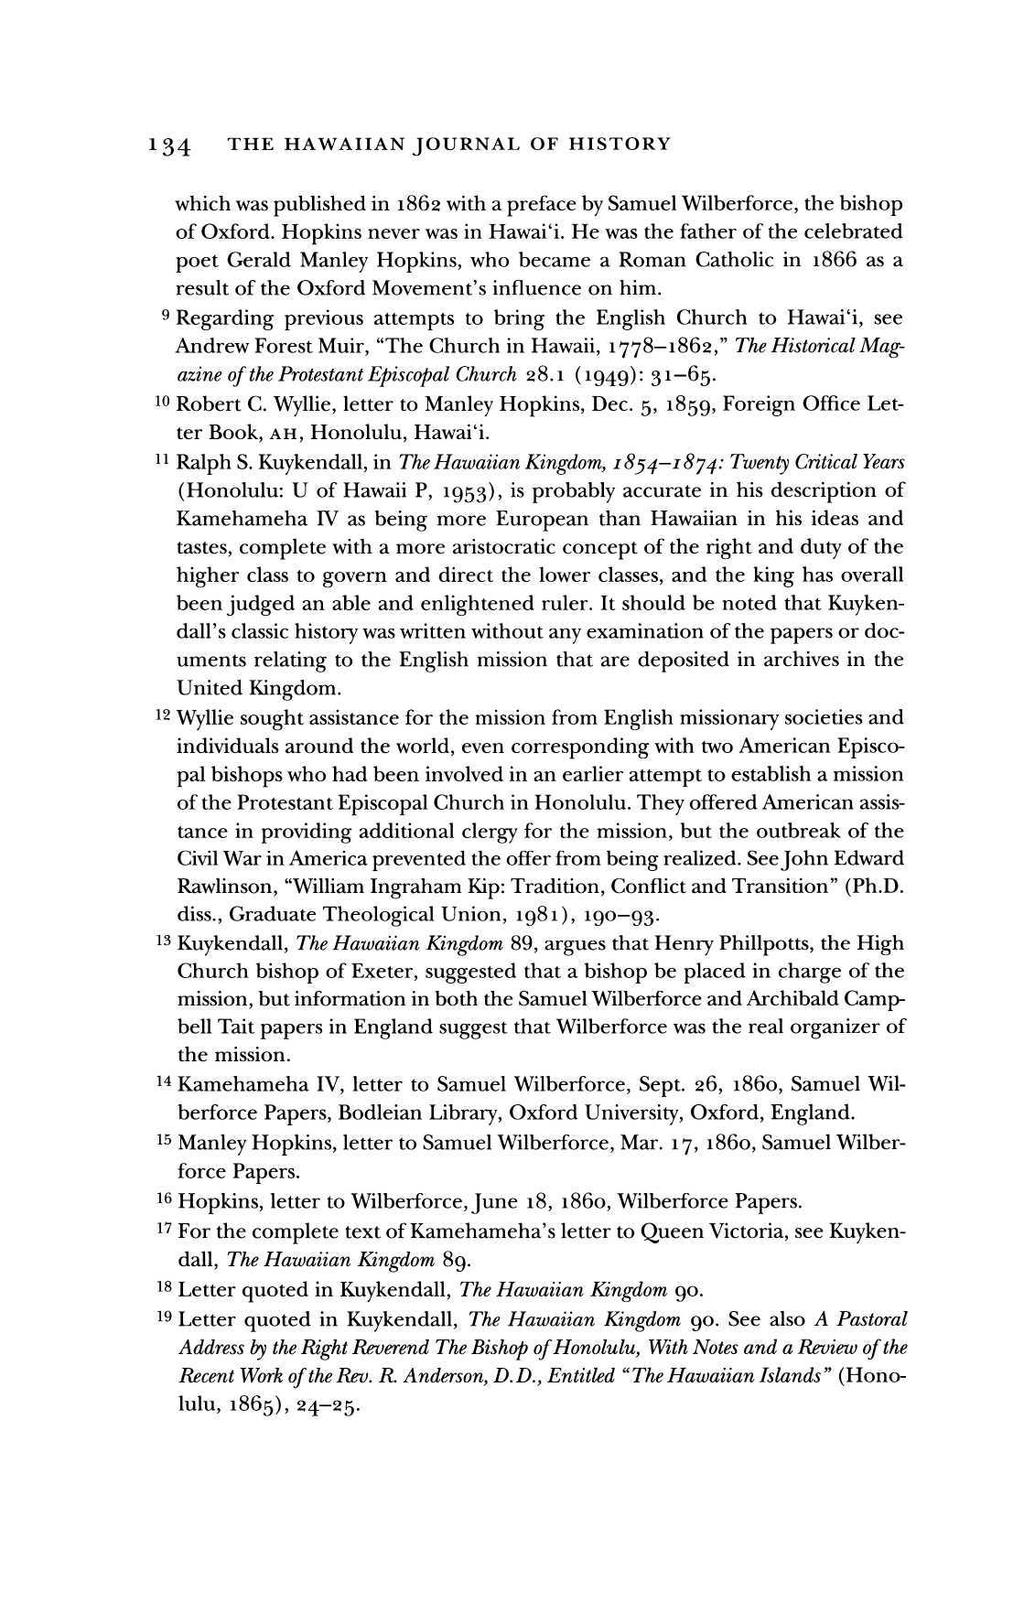 134 THE HAWAIIAN JOURNAL OF HISTORY which was published in 1862 with a preface by Samuel Wilberforce, the bishop of Oxford. Hopkins never was in Hawai'i.